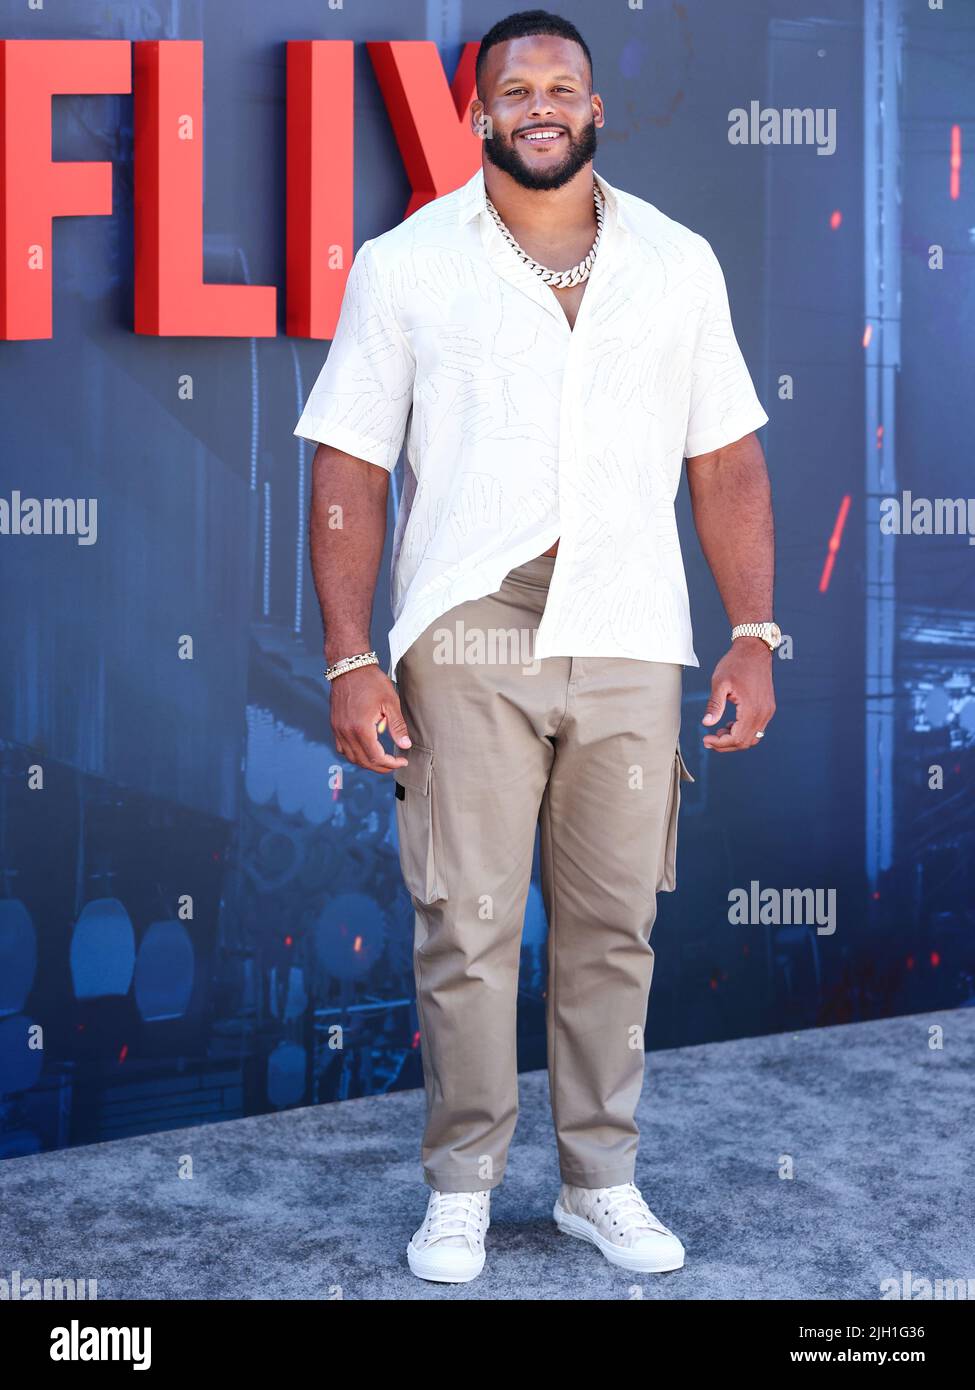 HOLLYWOOD, LOS ANGELES, CALIFORNIA, USA - JULY 13: American football defensive tackle player Aaron Donald arrives at the World Premiere Of Netflix's 'The Gray Man' held at the TCL Chinese Theatre IMAX on July 13, 2022 in Hollywood, Los Angeles, California, United States. (Photo by Xavier Collin/Image Press Agency) Stock Photo